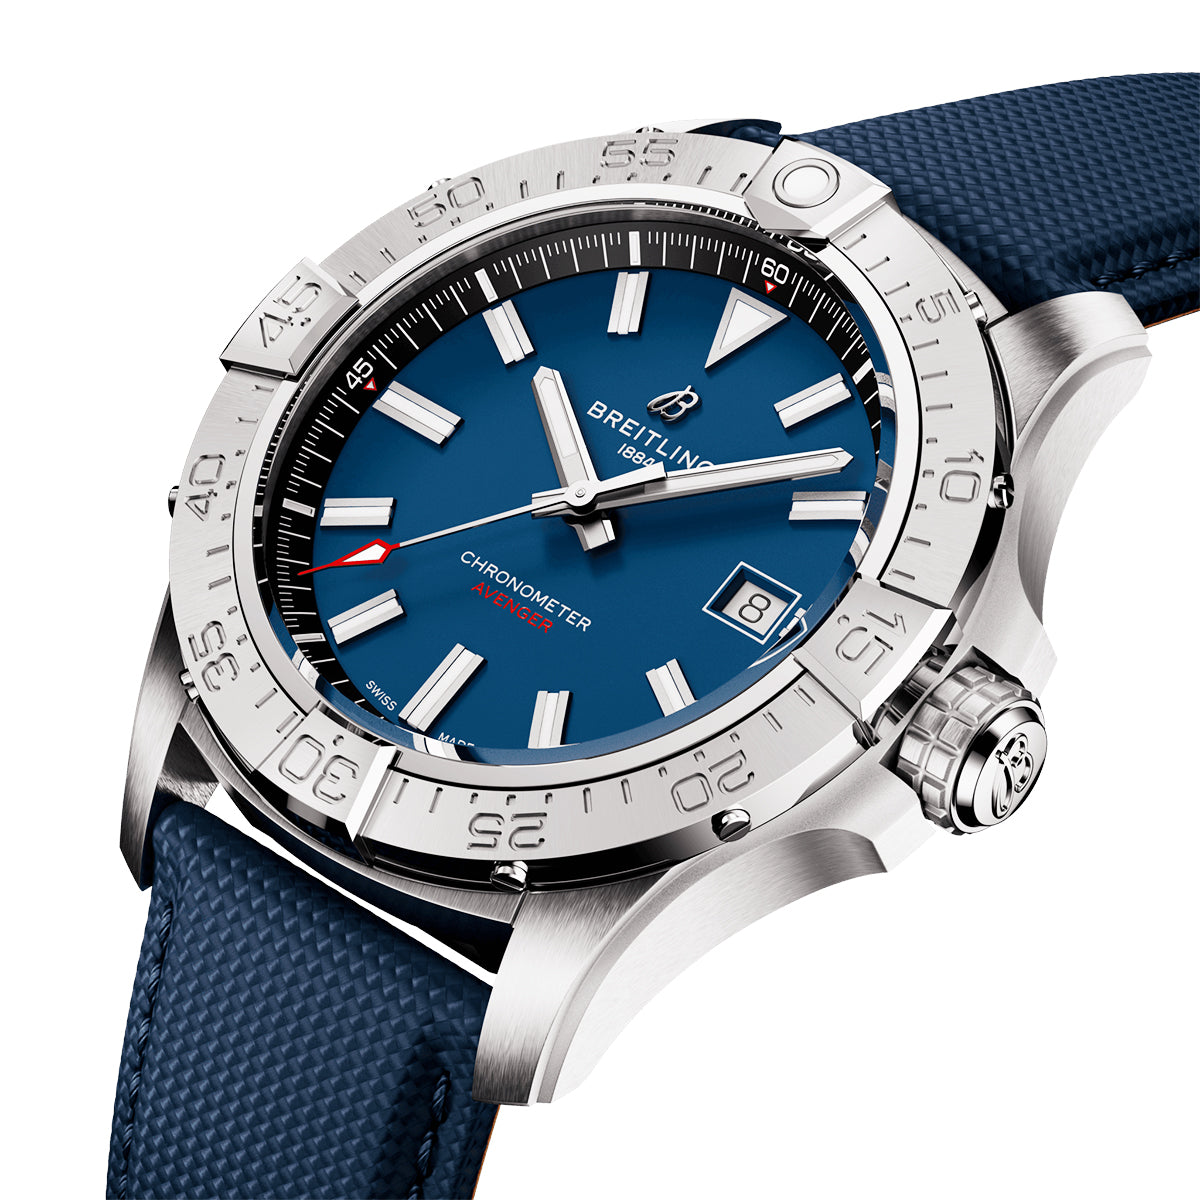 Avenger 42mm Blue Dial Automatic Strap Watch